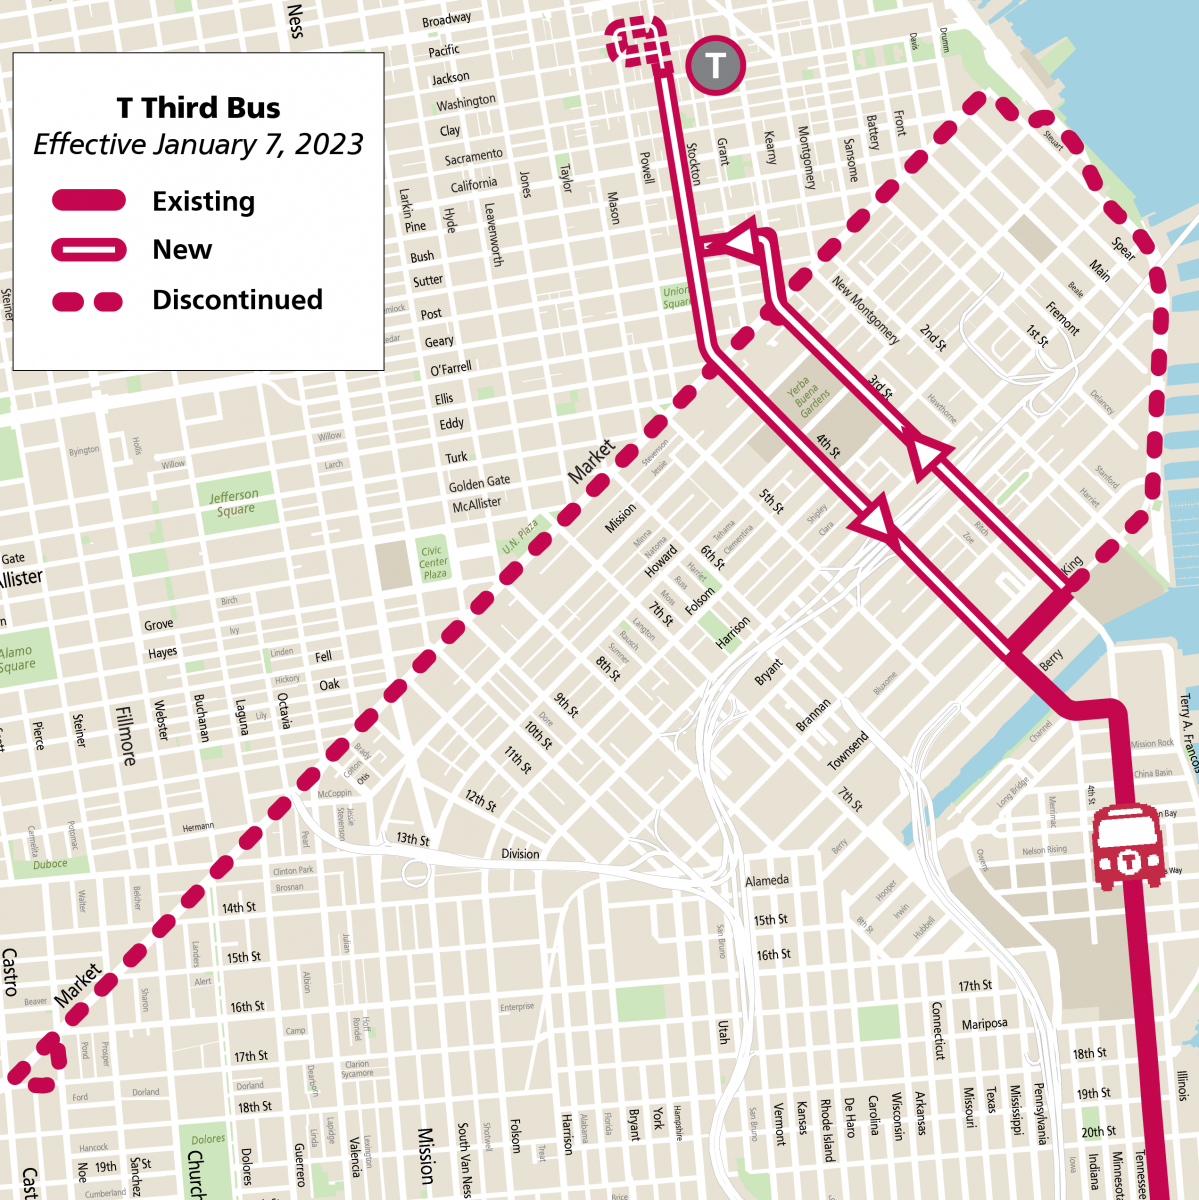 Map of T Third Street bus route effective January 7, 2023